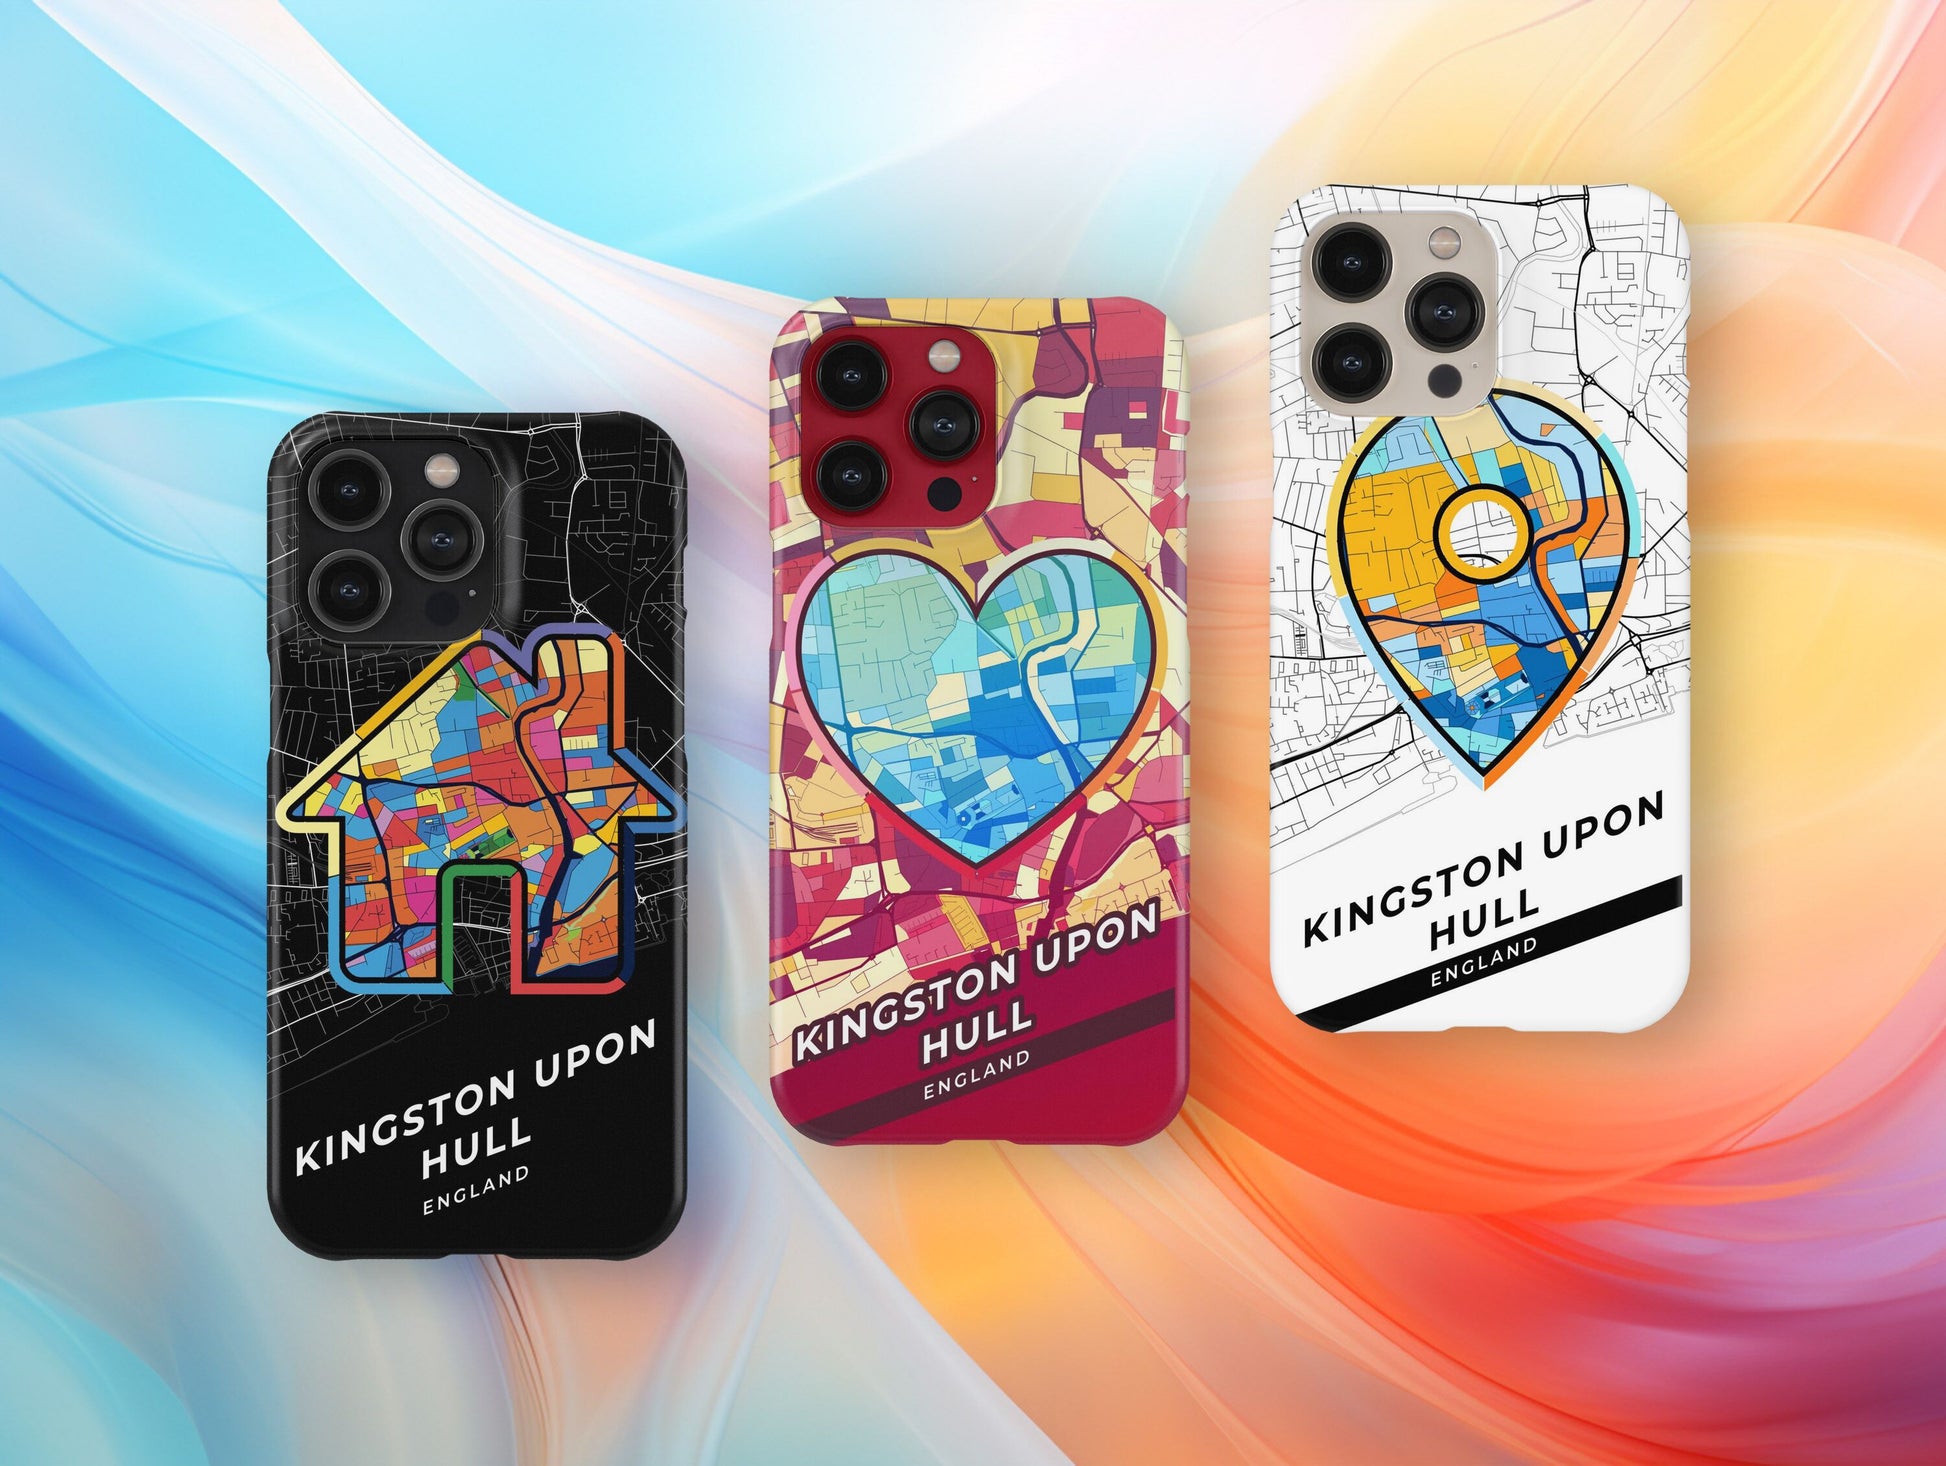 Kingston Upon Hull England slim phone case with colorful icon. Birthday, wedding or housewarming gift. Couple match cases.